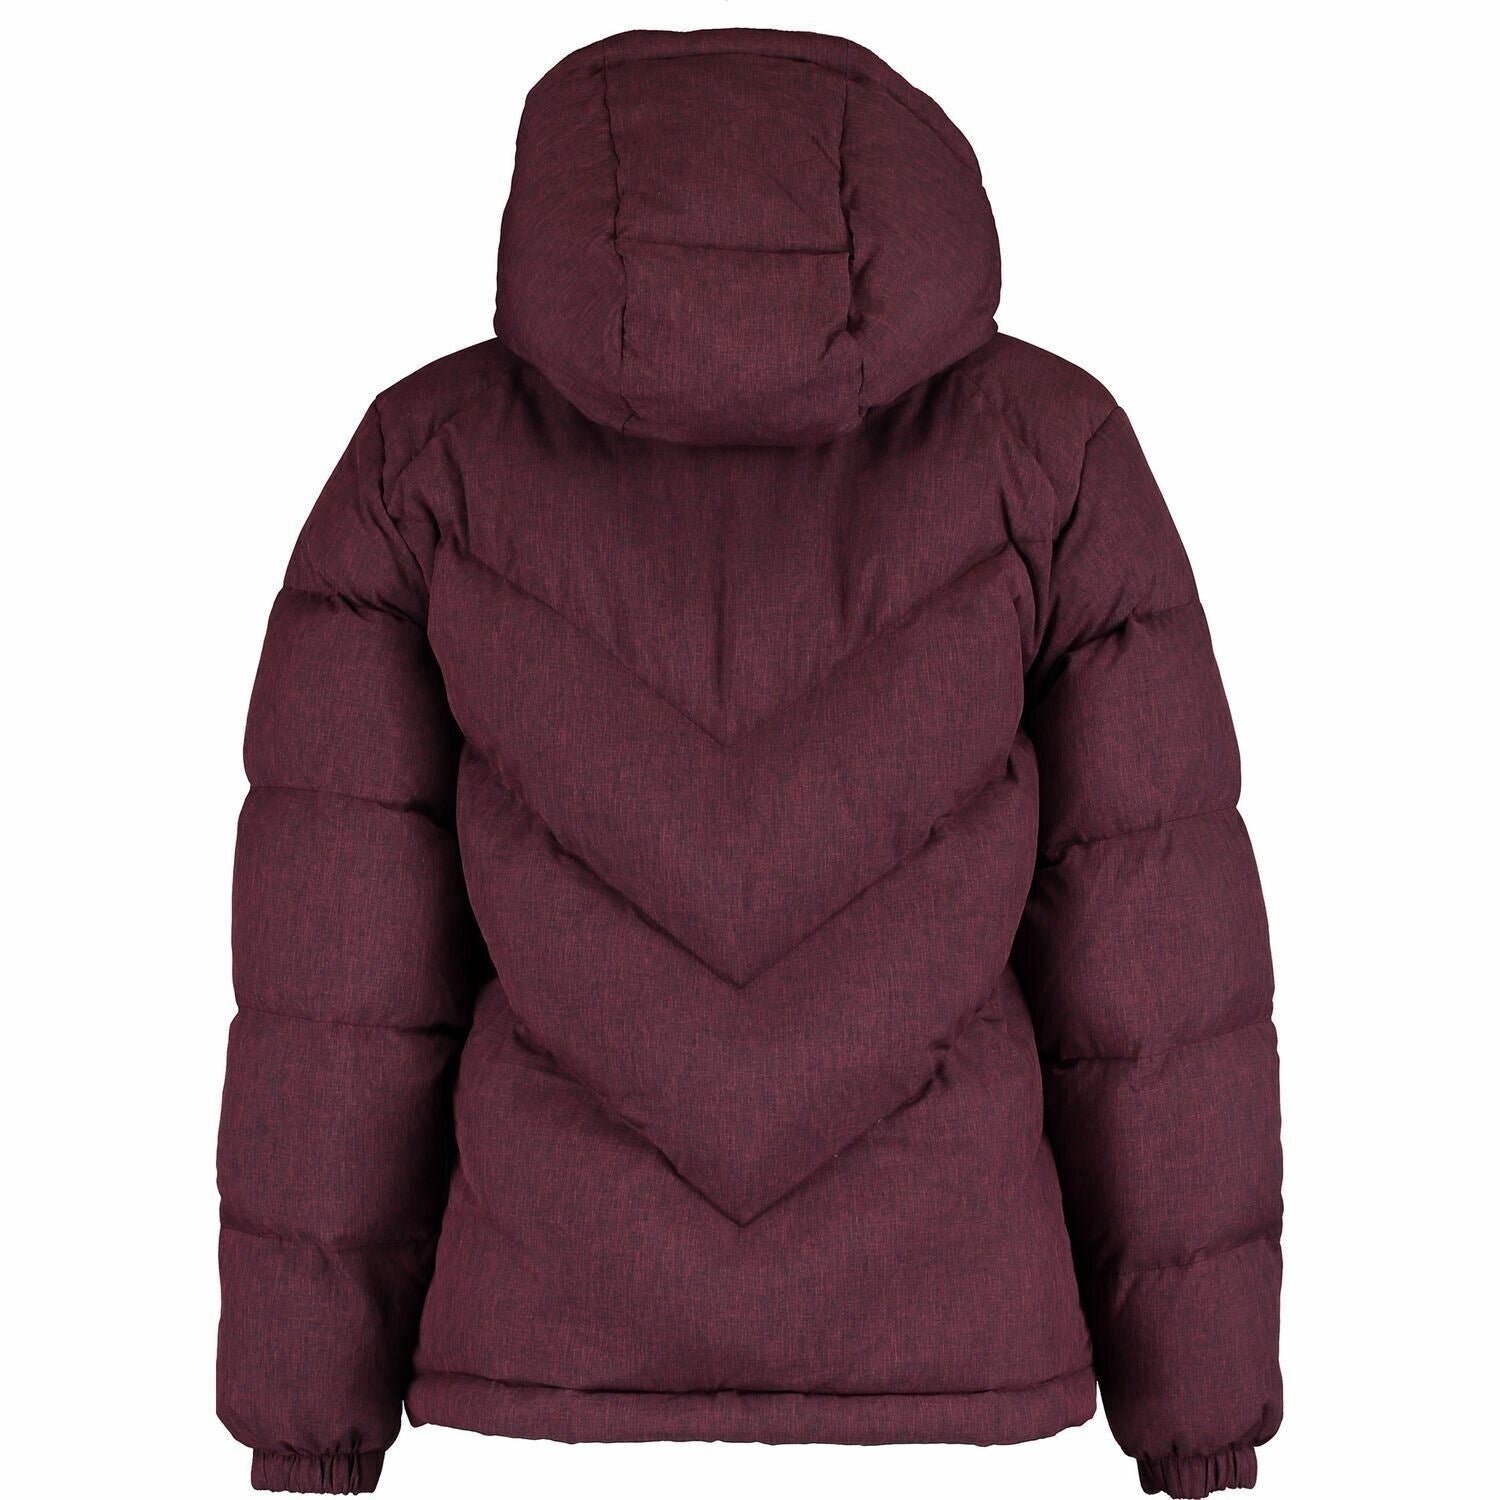 LACOSTE LIVE! Womens Down Padded Hooded Jacket Coat, Maroon Red, size L